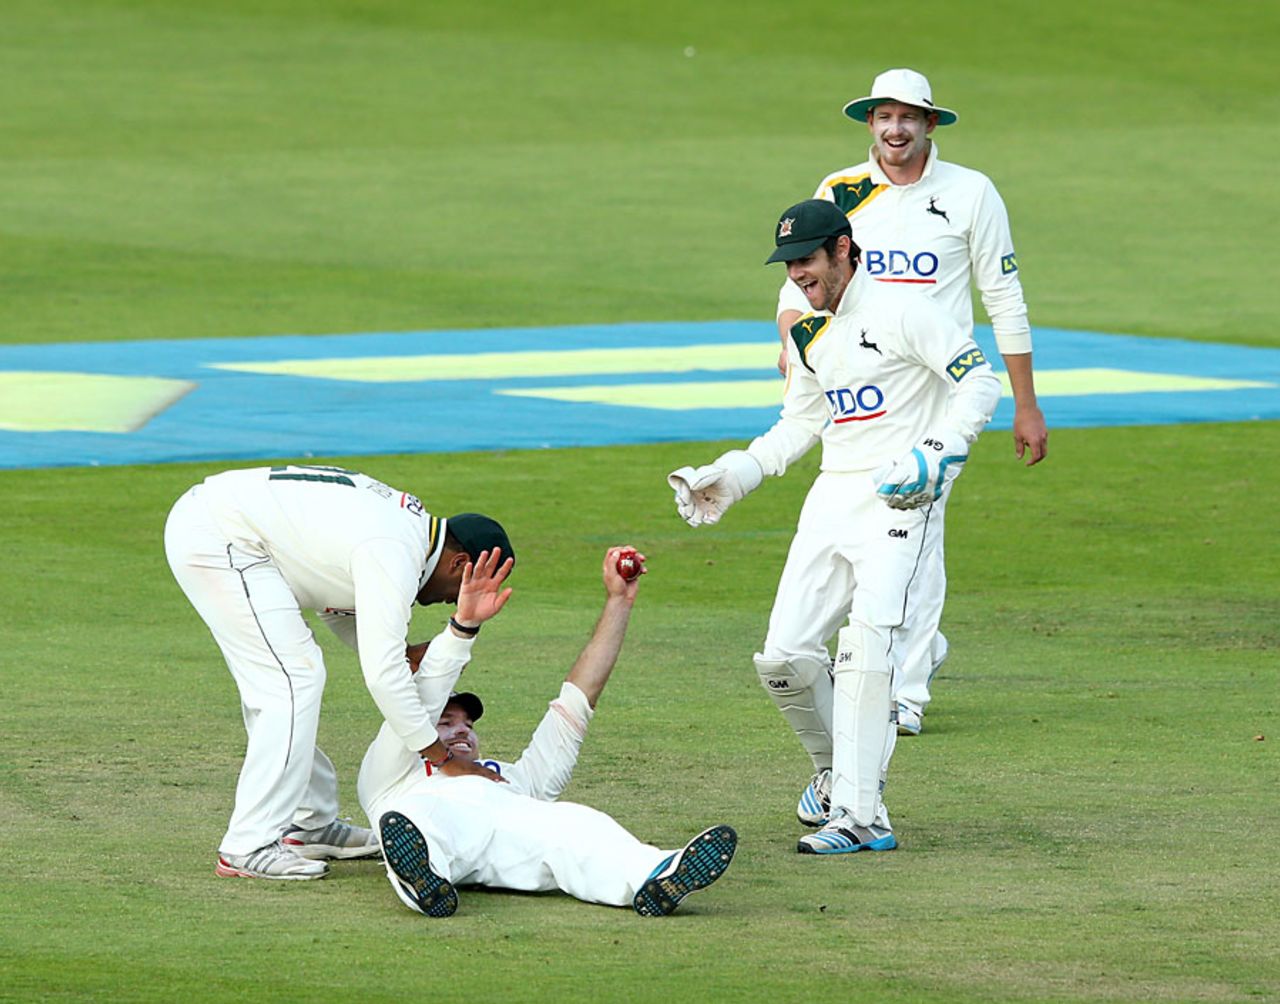 Michael Lumb took a stunning catch in the gully, Nottinghamshire v Yorkshire, County Championship, Division One, Trent Bridge, 1st day, September 9, 2014